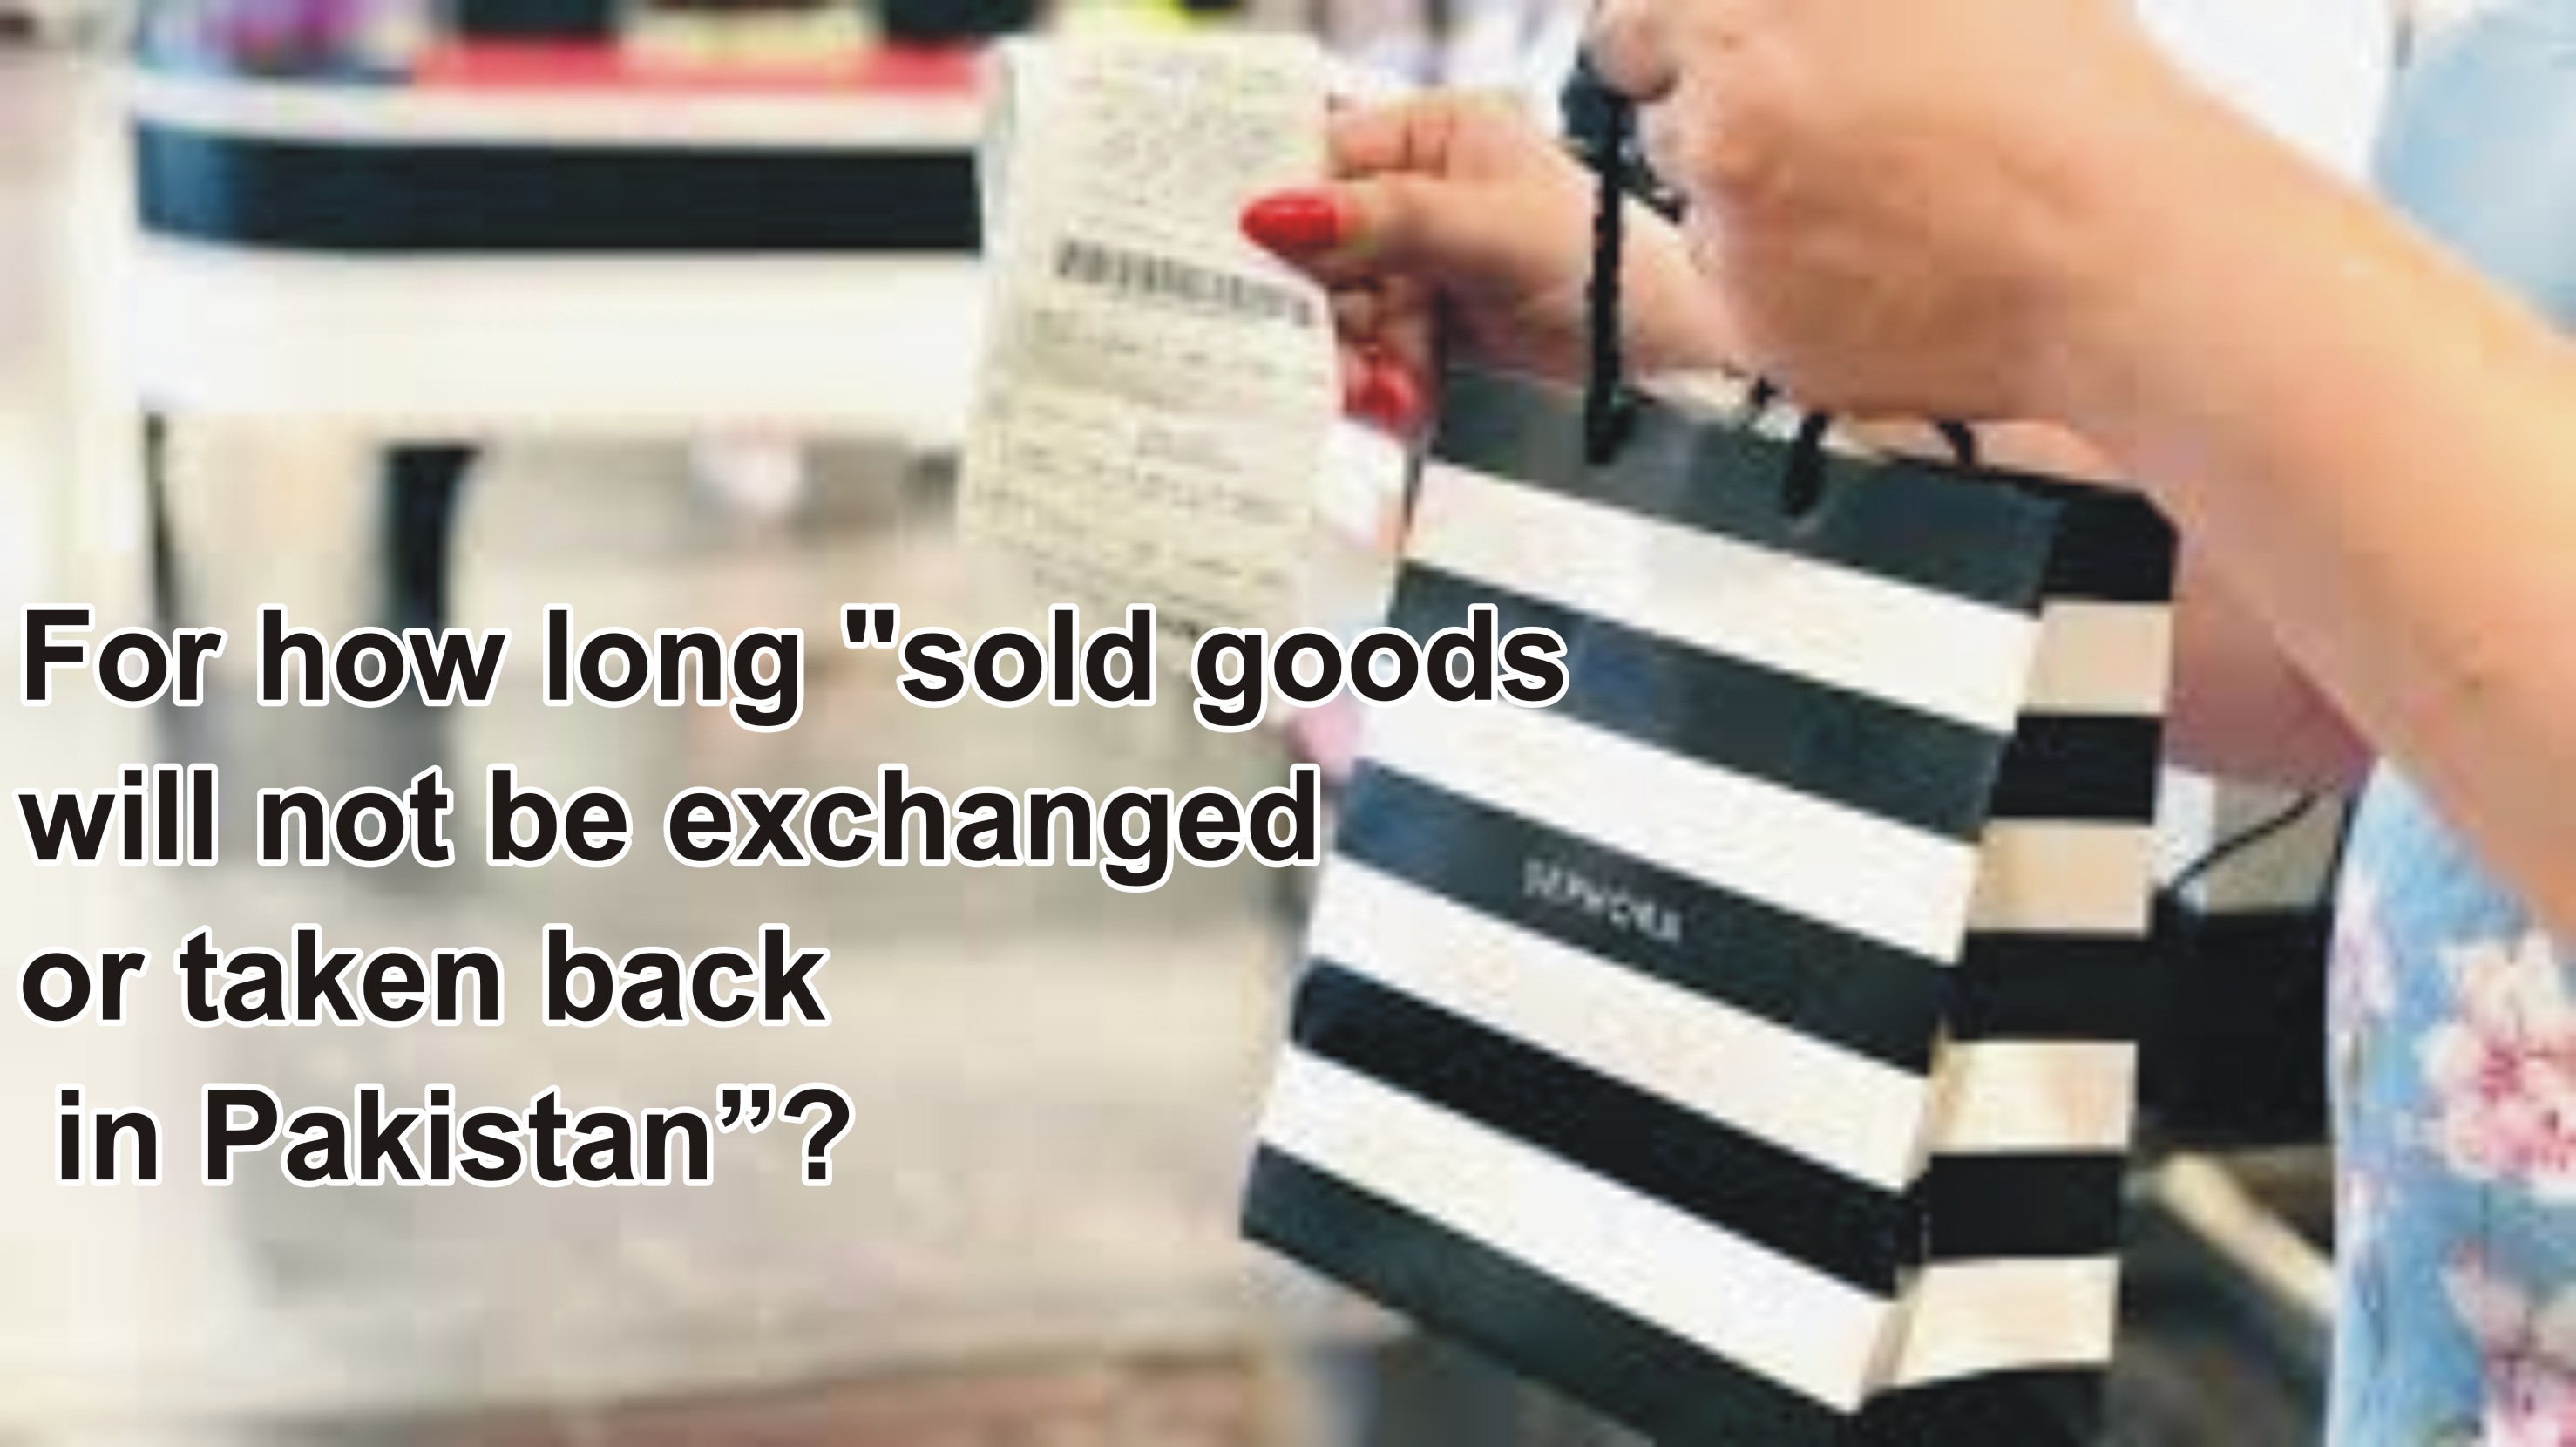 For how long, “sold goods will not be exchanged or taken back” in Pakistan?